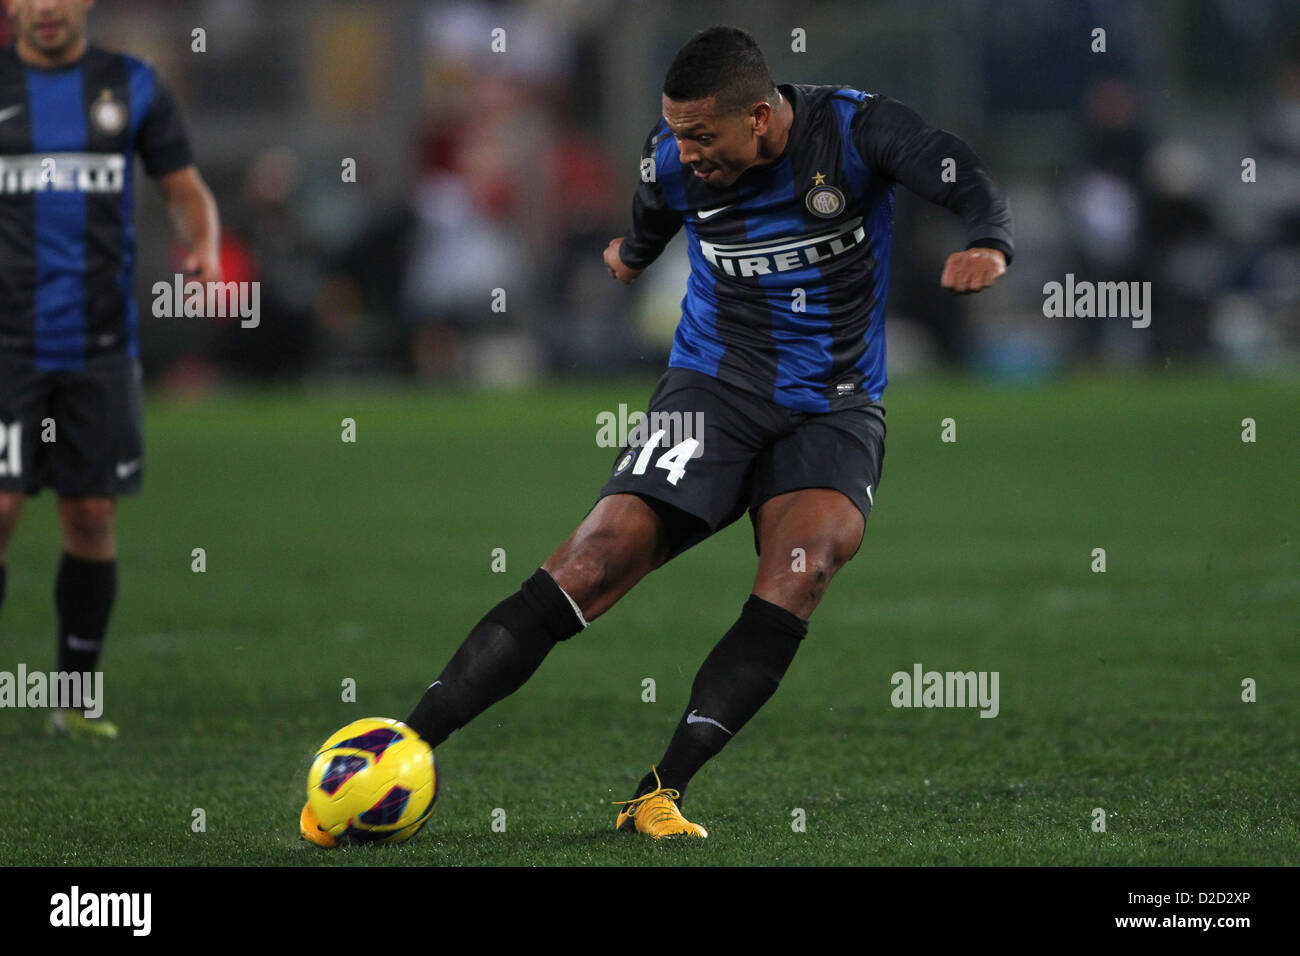 20.01.2013 Rome, Italy. Fredy Guarin in action during the Serie A game between Roma and Inter Milan from the Stadio Olympico. Stock Photo